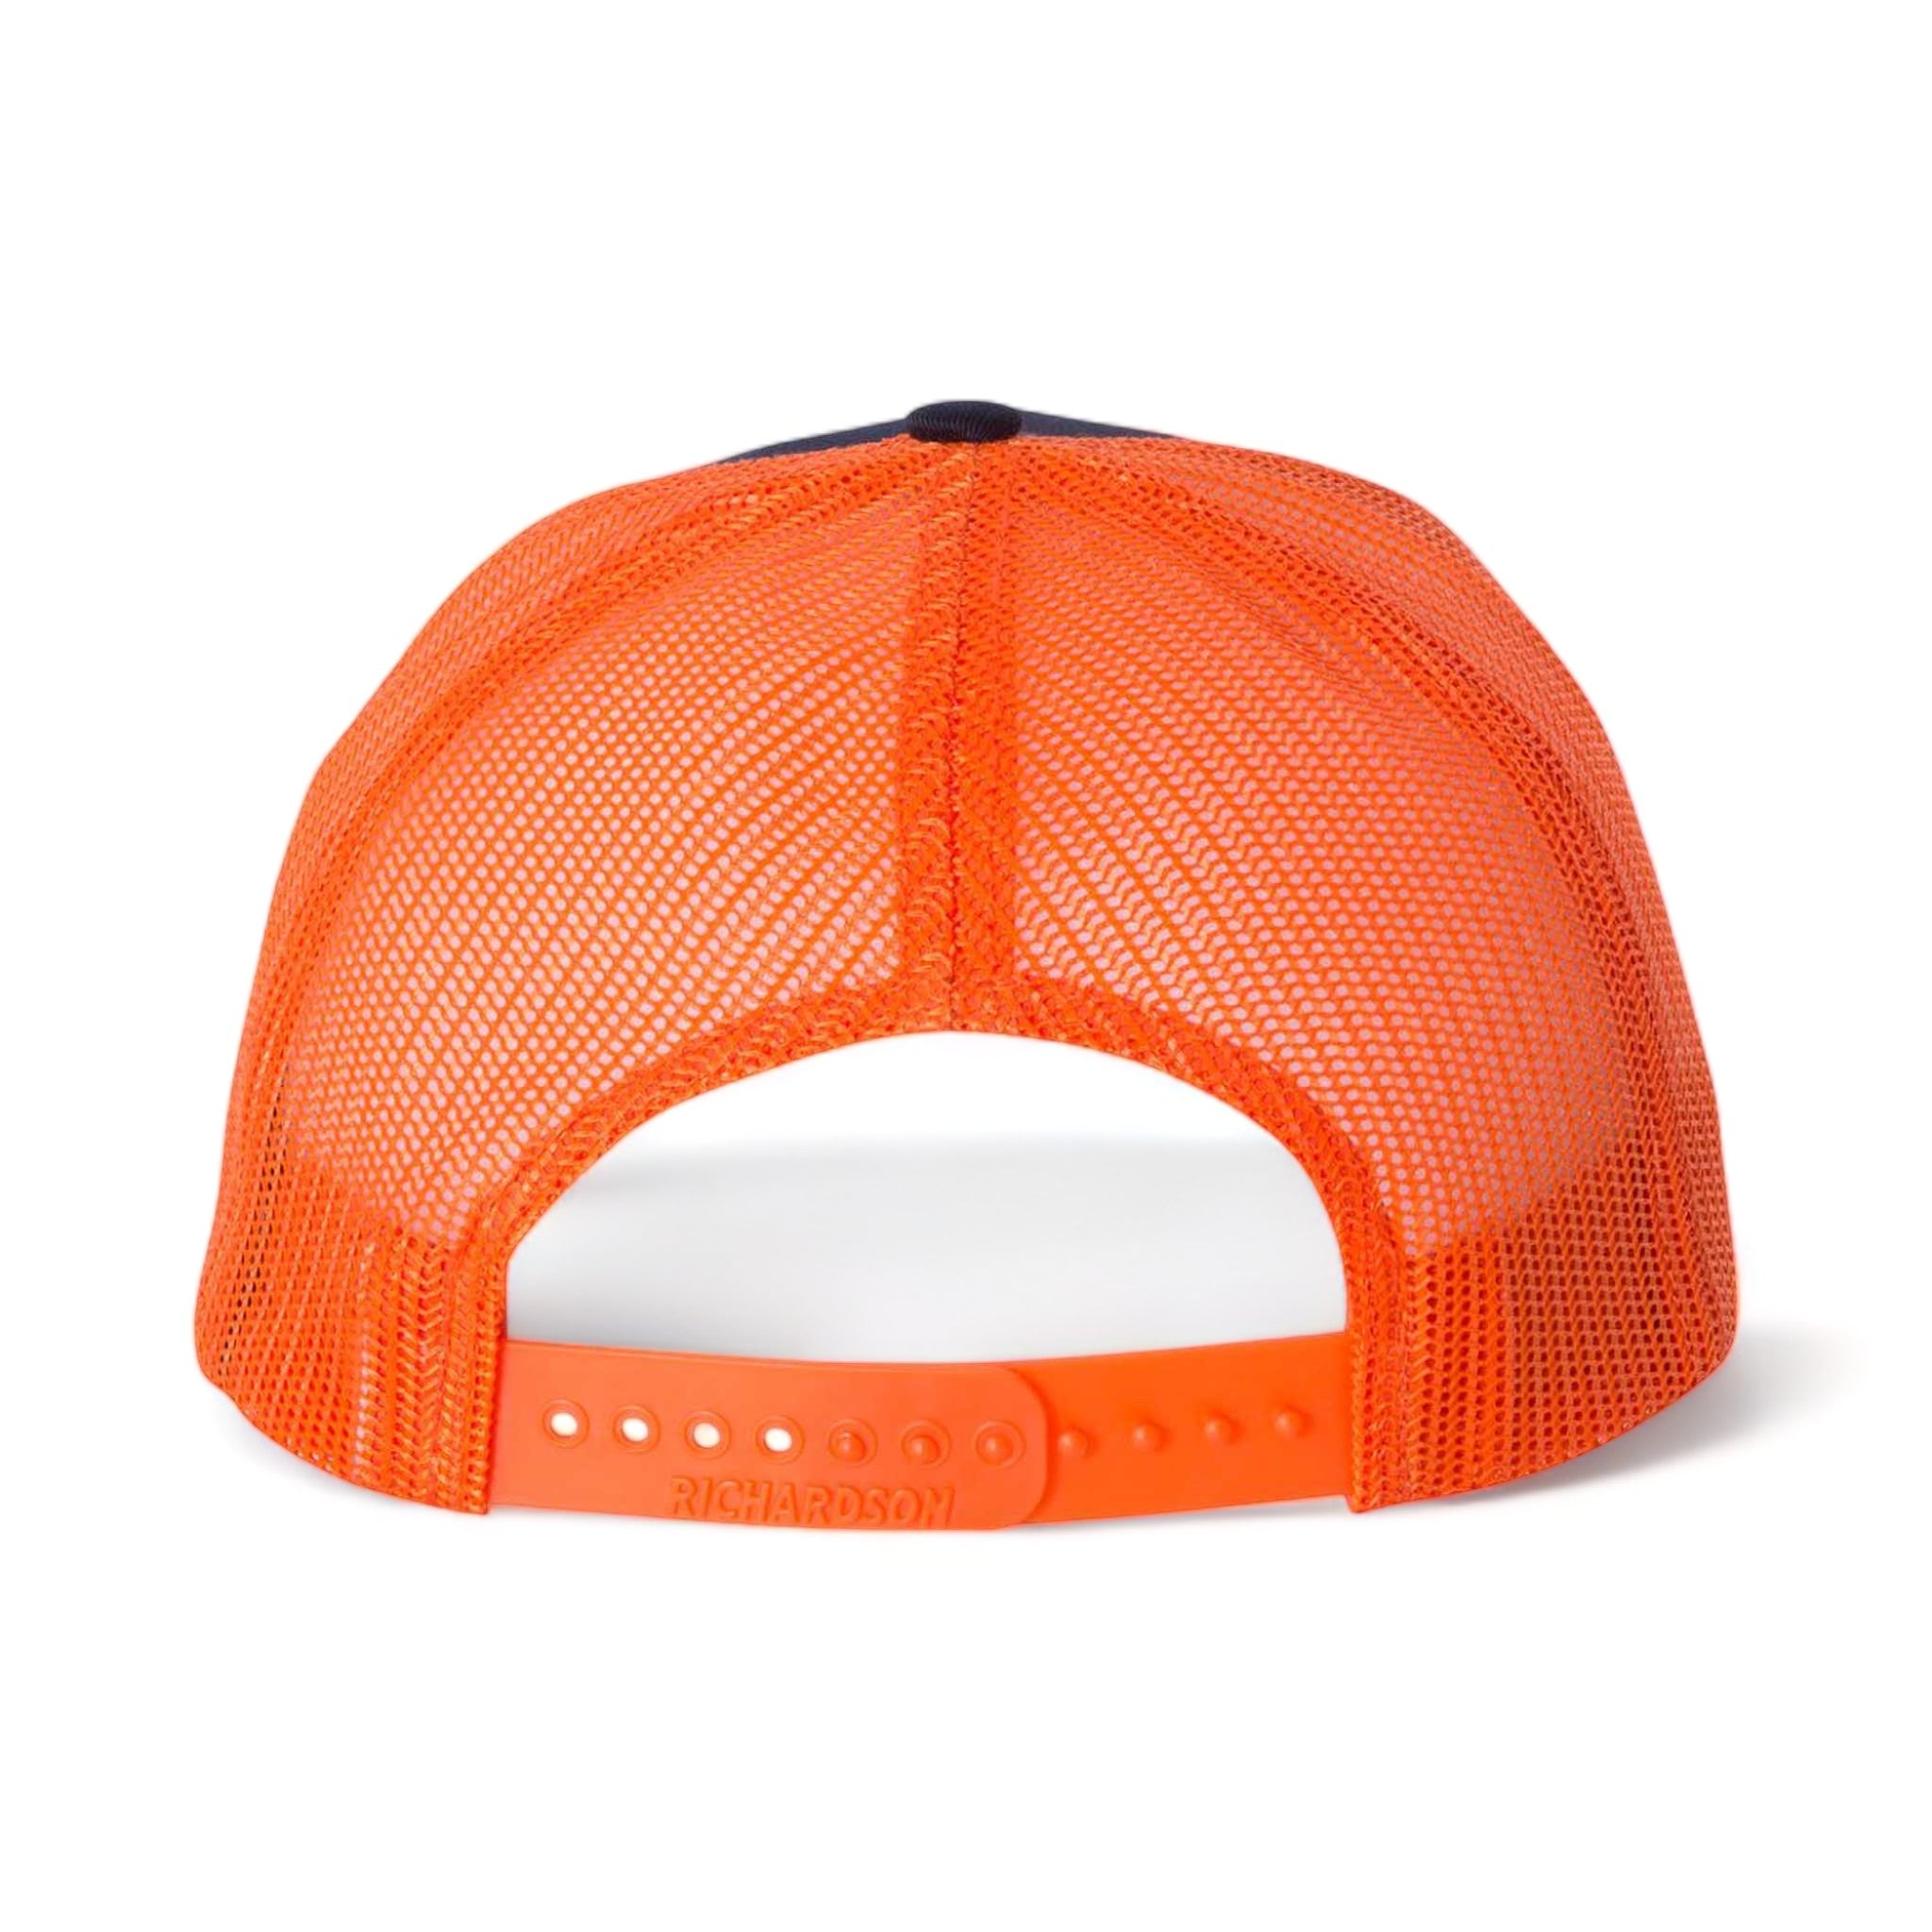 Back view of Richardson 112 custom hat in navy and orange